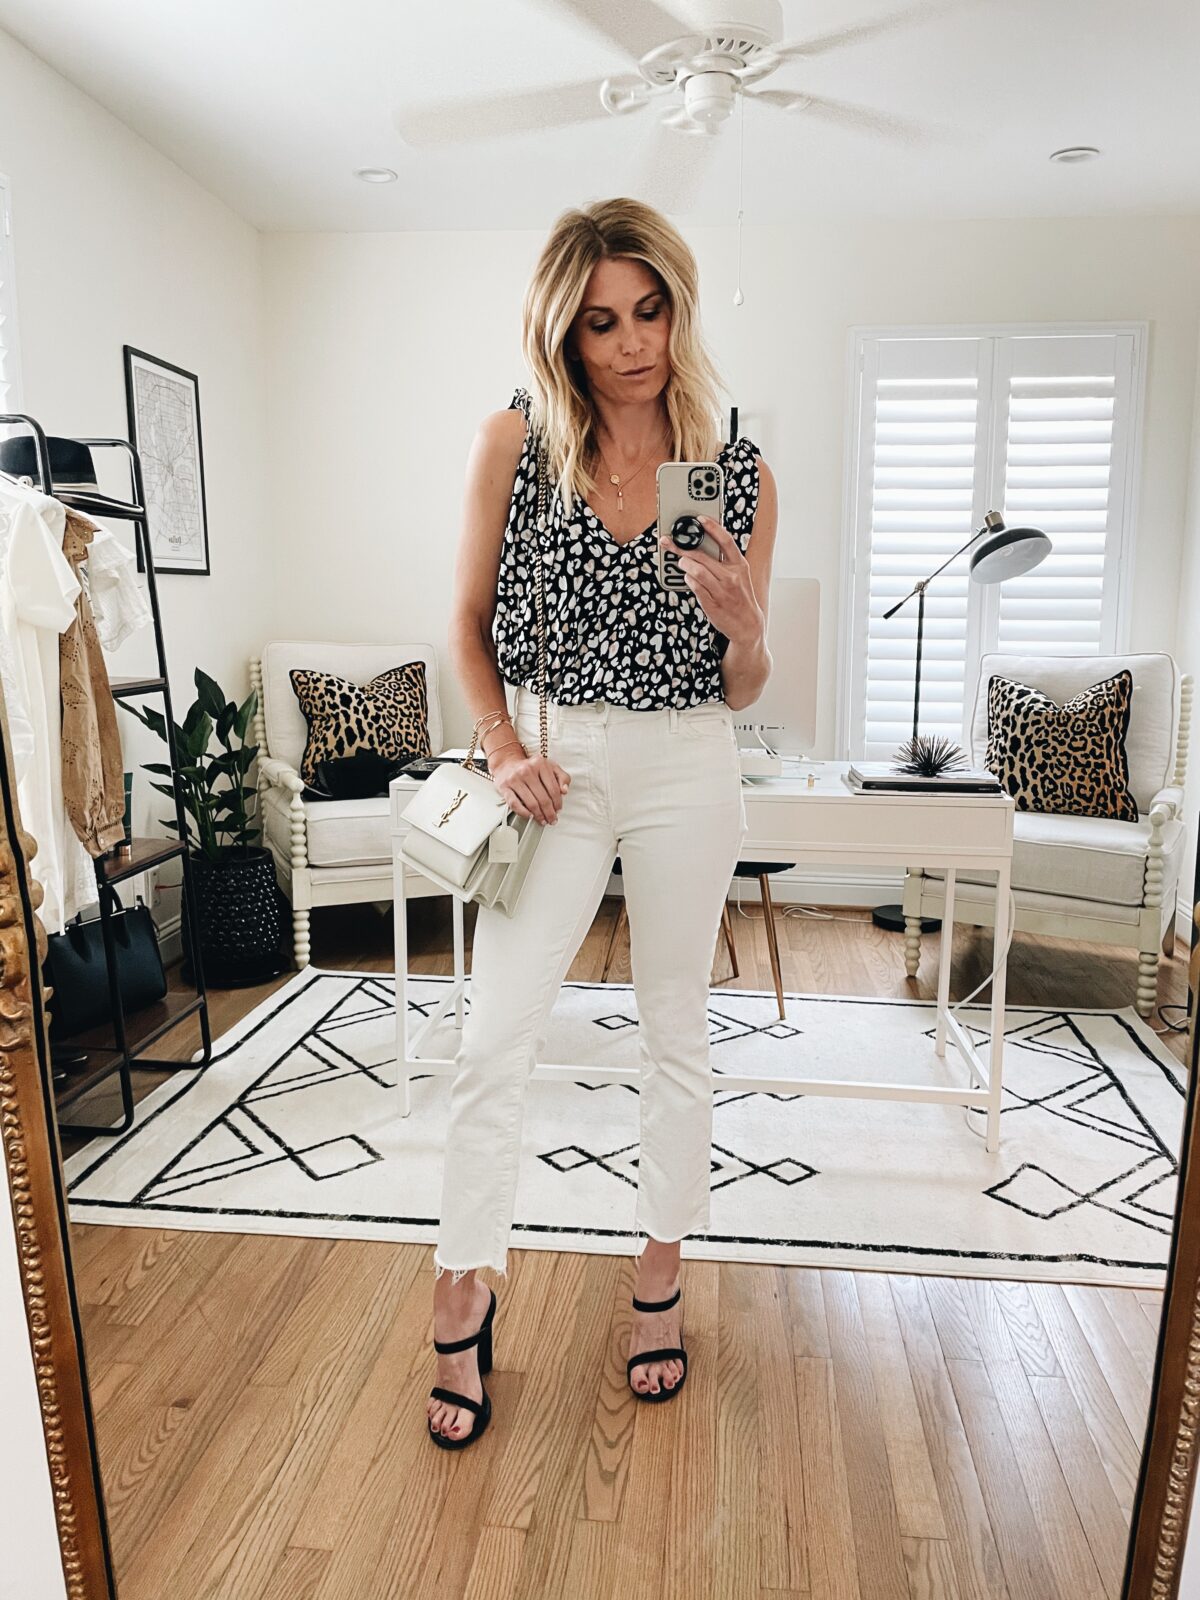 woman taking a selfie at home and wearing a printed top, white pants, and black high heels